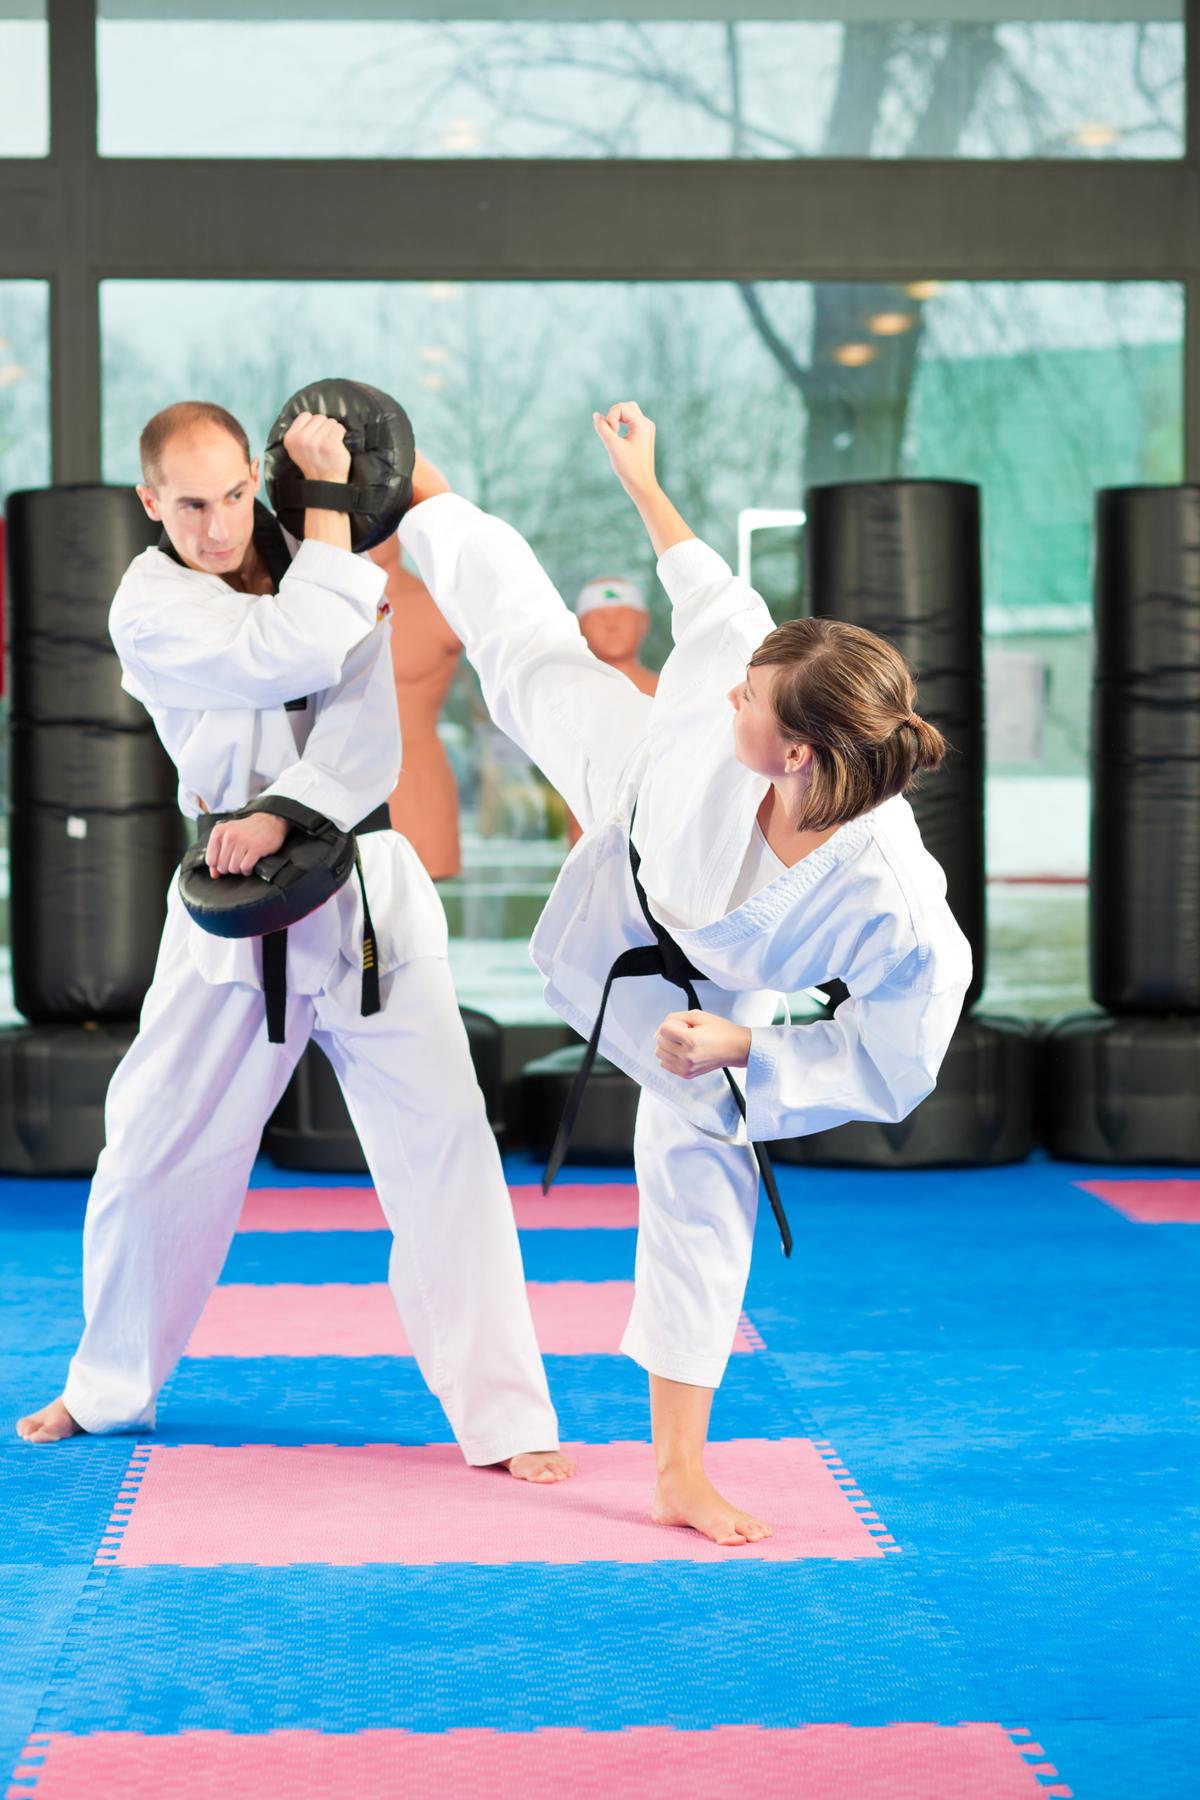 A Complete List of Types of Martial Arts Practiced